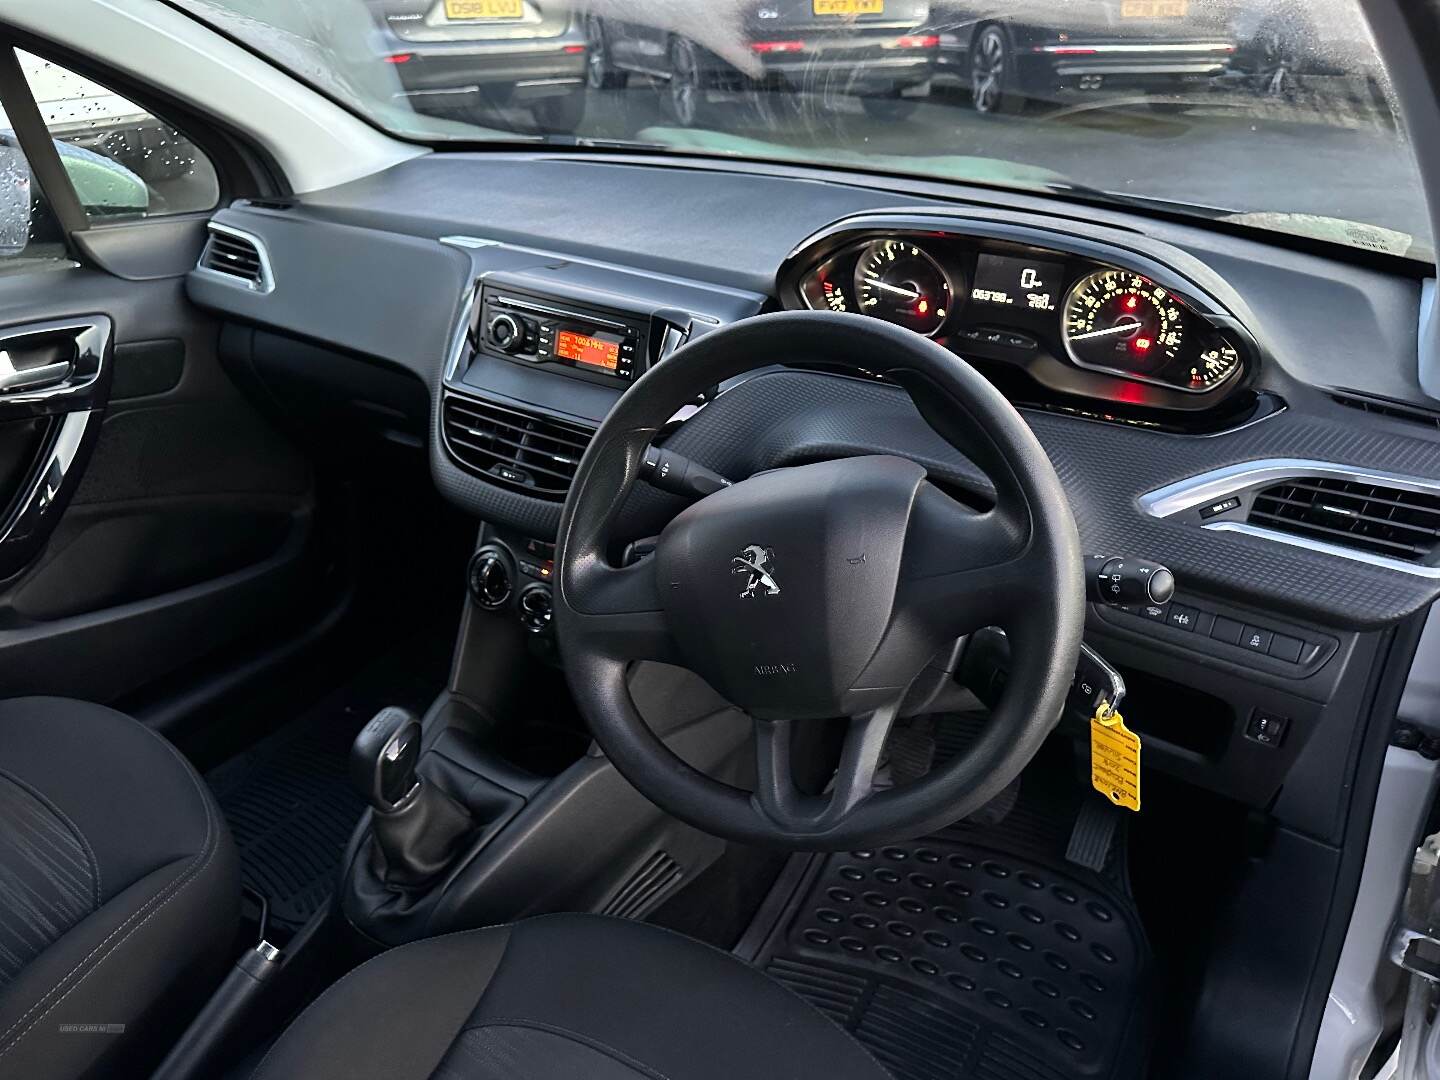 Peugeot 208 ACCESS HDI in Down